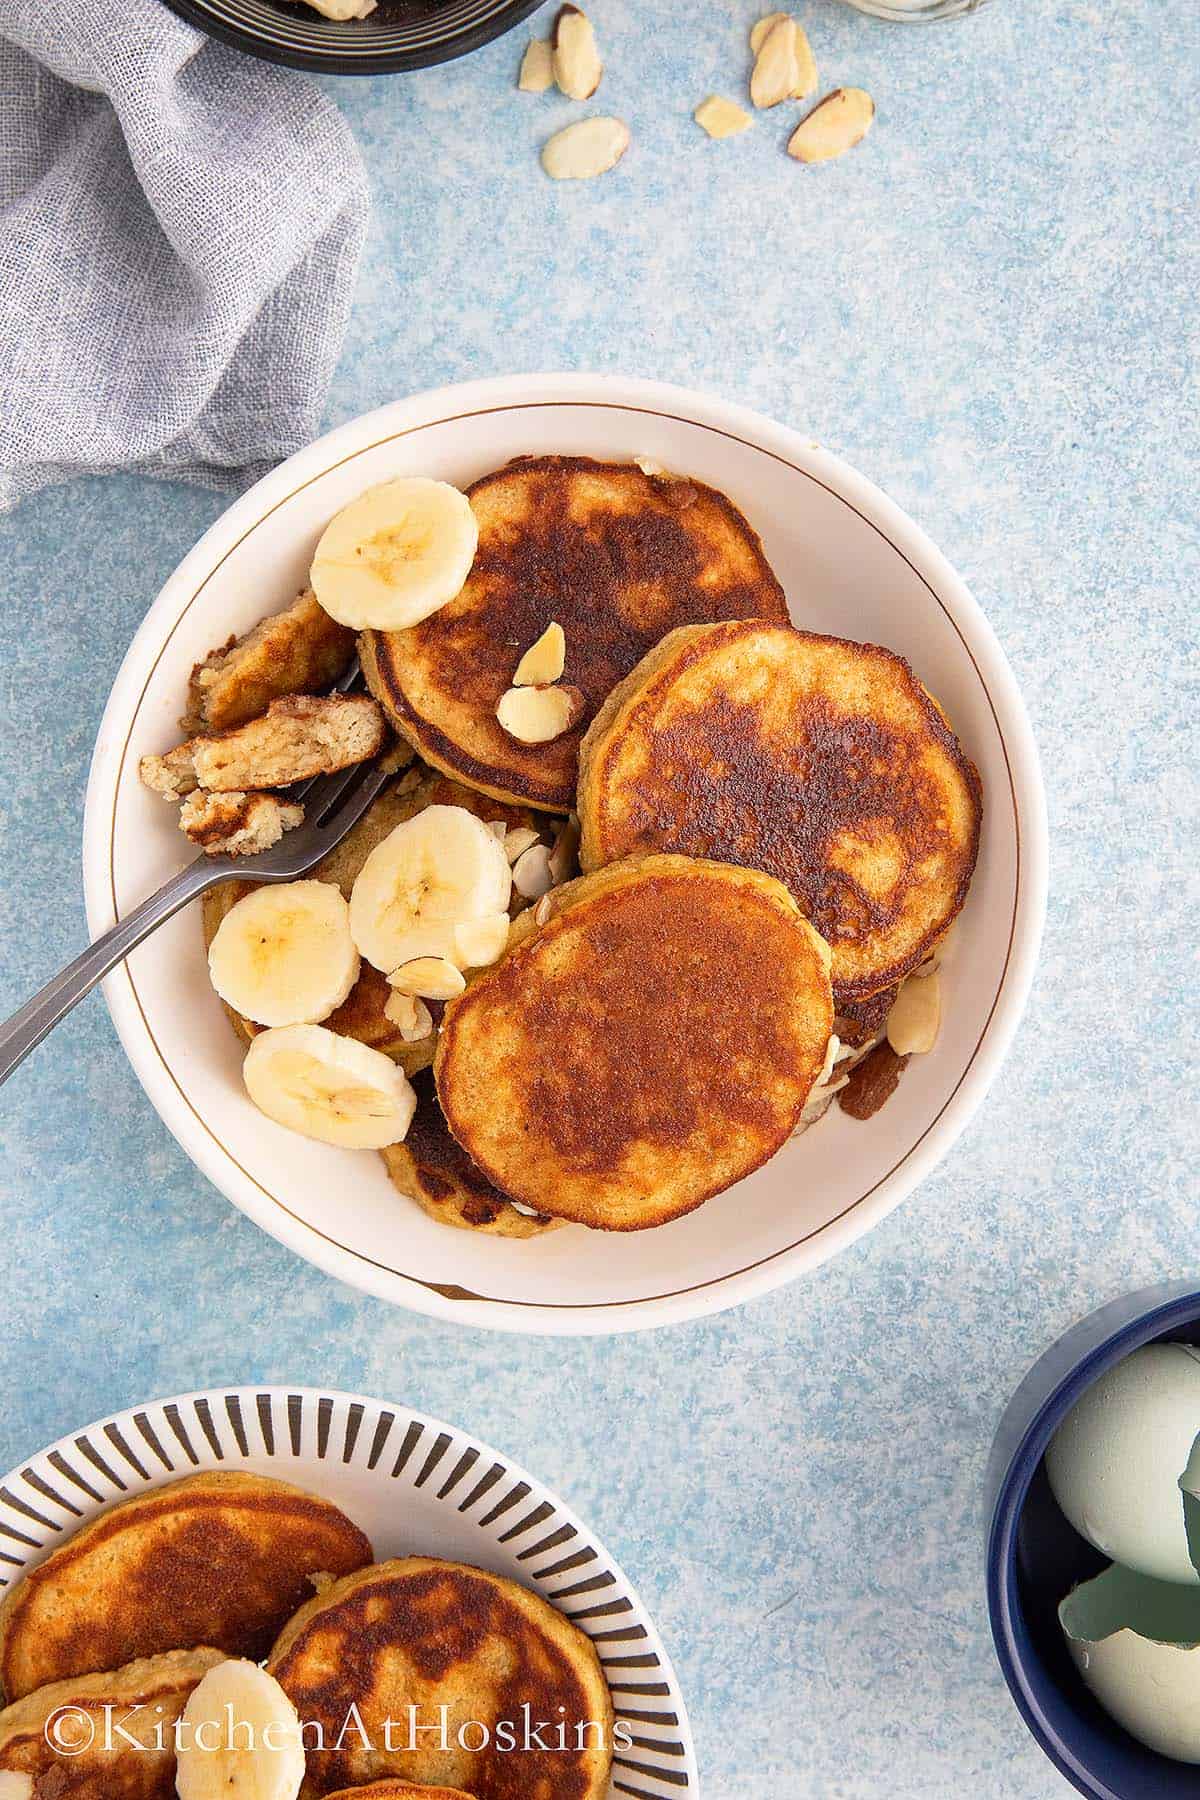 ALMOND FLOUR PANCAKES IN A BOWL TOPPED WITH SLICED BANANAS AND ALMONDS.